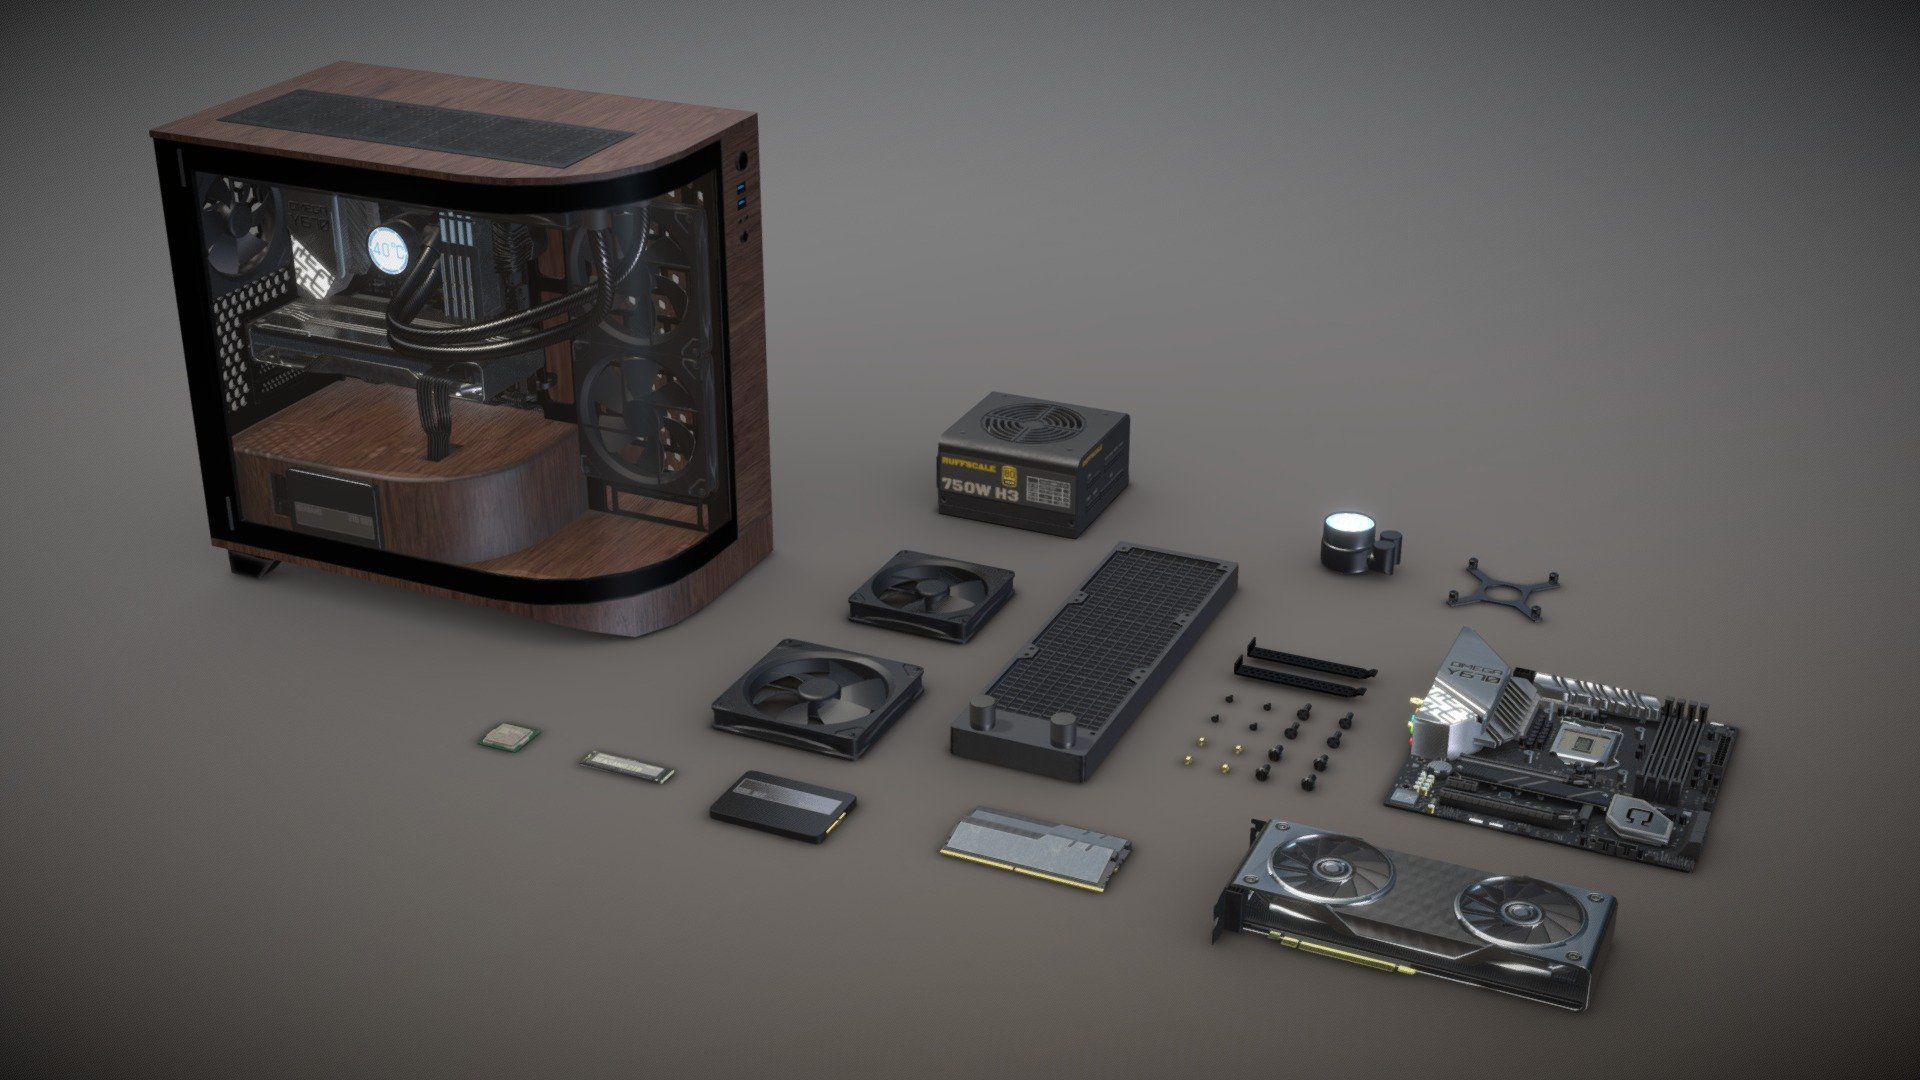 This model is based off of my old computer model with updated meshes and textures. Some parts are also completely new, like the custom designed case. Parts include : 




CPU

M.2 SSD

2.5 Inch SSD

RAM

Graphics Card

Radiator (260mm)

Fans (140mm and 120mm)

Power supply

CPU cooling block and mount

Screw set

Case (Removable front, back, top mesh and mount brackets)

There are also some cable ends for things like power and SATA in the case, so incase those are needed they're there. (Pun intended)
If you need free versions of similar assets, check out my original, &ldquo;Dream Computer Setup